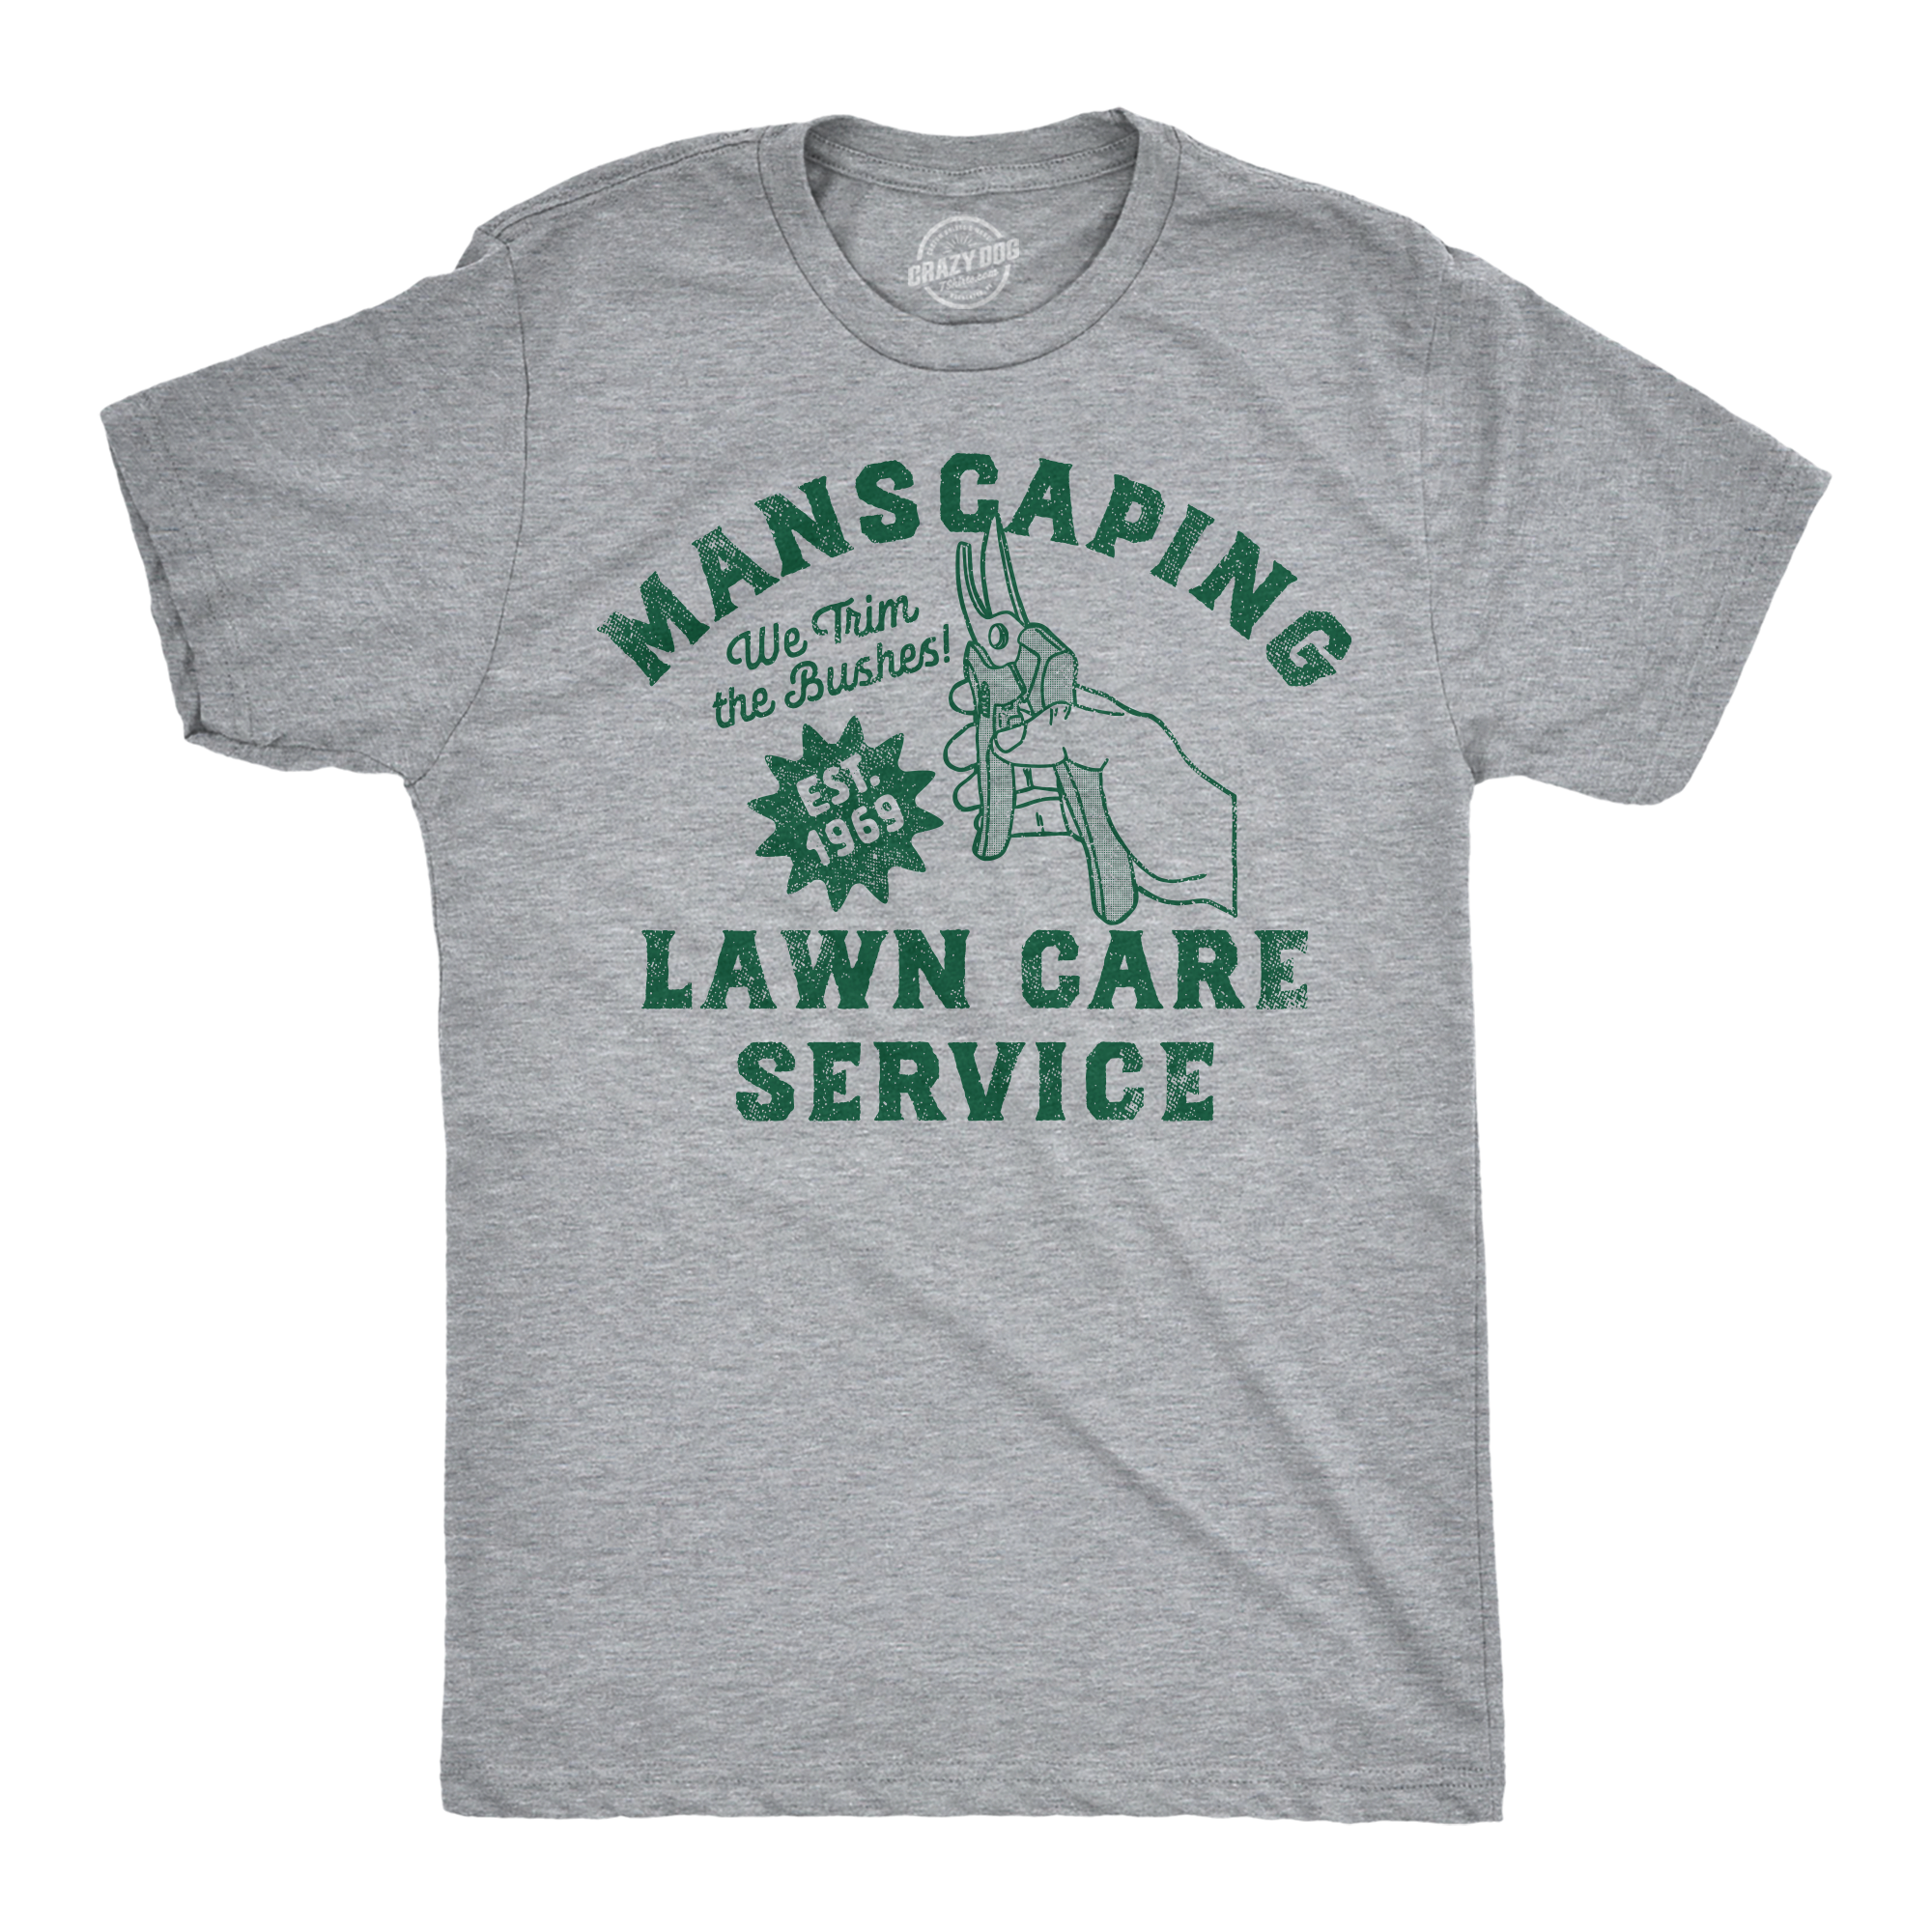 Funny Light Heather Grey - Manscaping Lawn Care Manscaping Lawn Care Service Mens T Shirt Nerdy sarcastic Tee